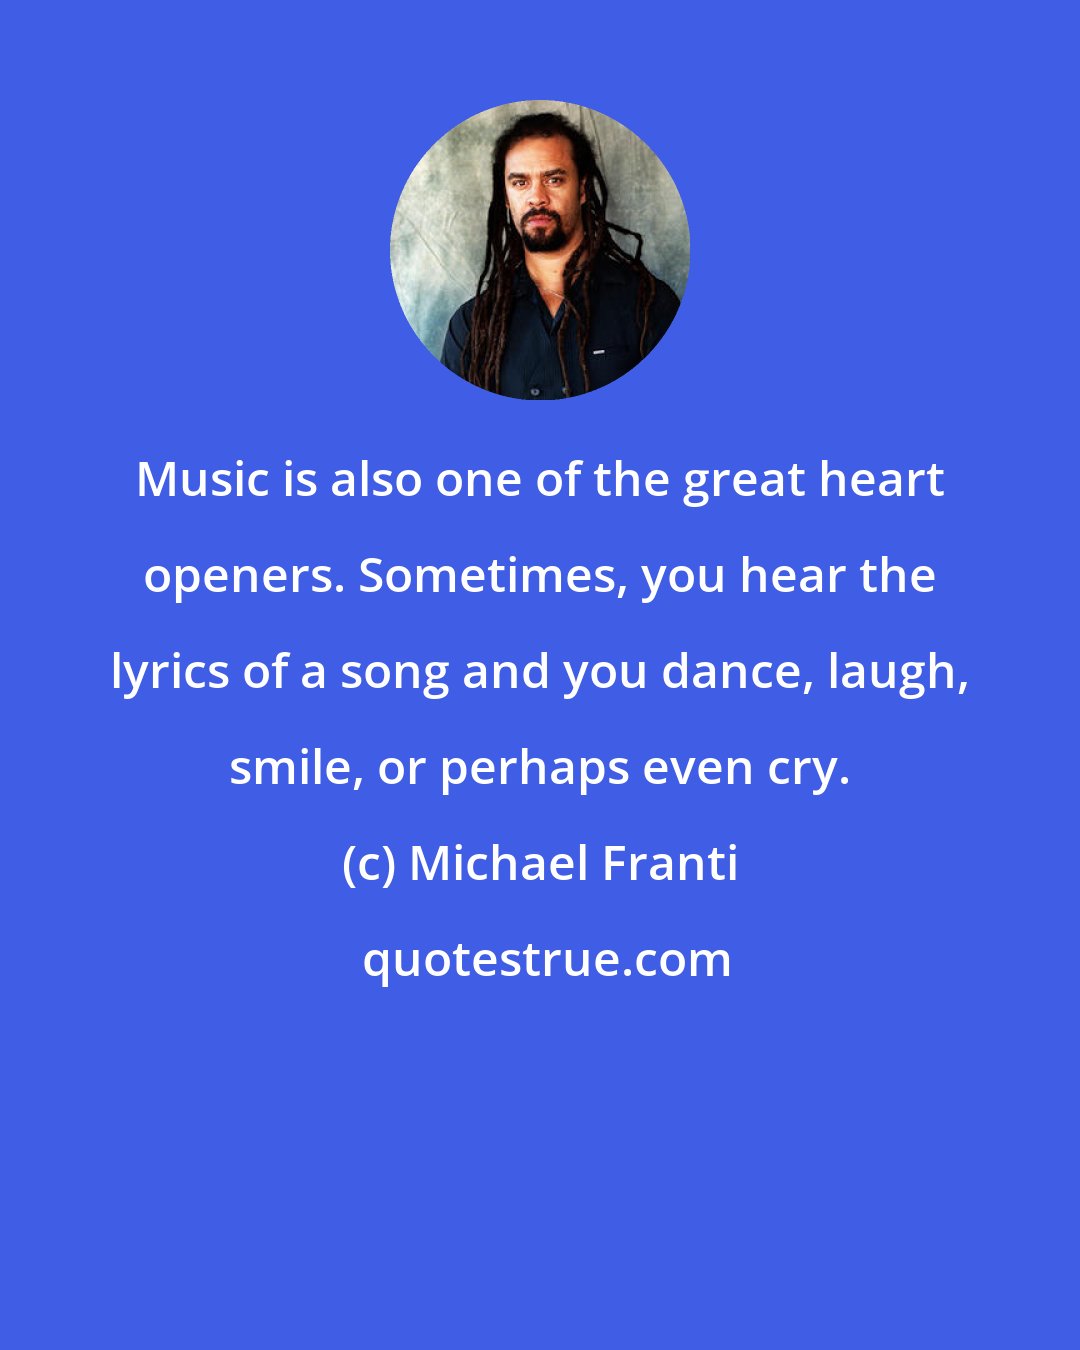 Michael Franti: Music is also one of the great heart openers. Sometimes, you hear the lyrics of a song and you dance, laugh, smile, or perhaps even cry.